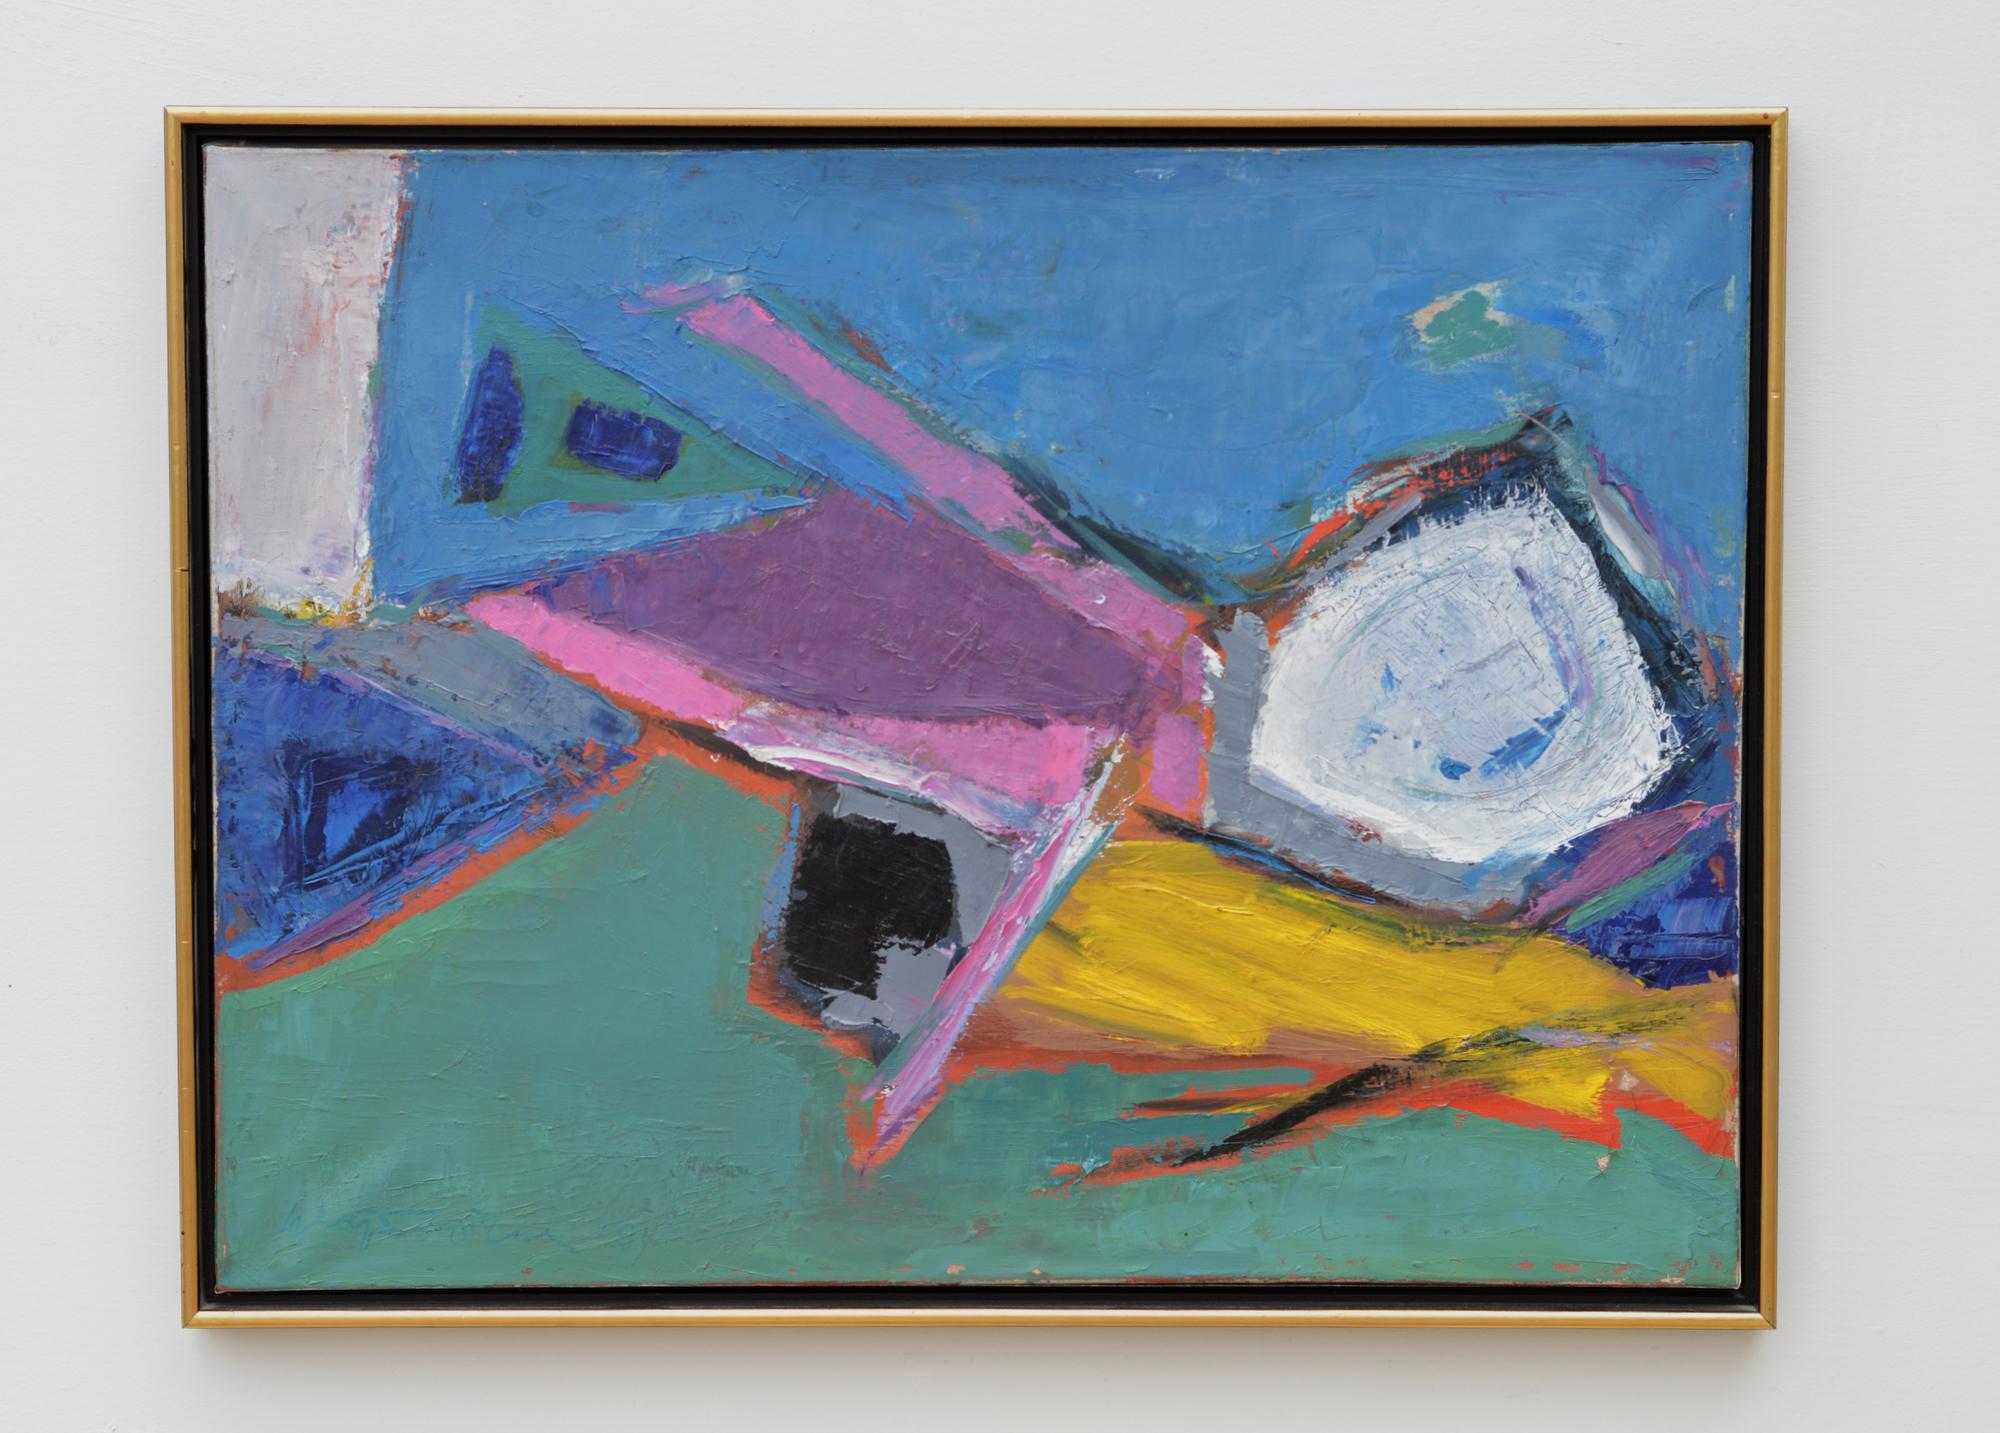 A midcentury abstract painting of sublime and vibrant palette. The illegibly signed and dated mixed medium canvas was purchased in Amsterdam in 1969. While it's a bit of a mysterious documentation on this piece, when you sit in front of it and view